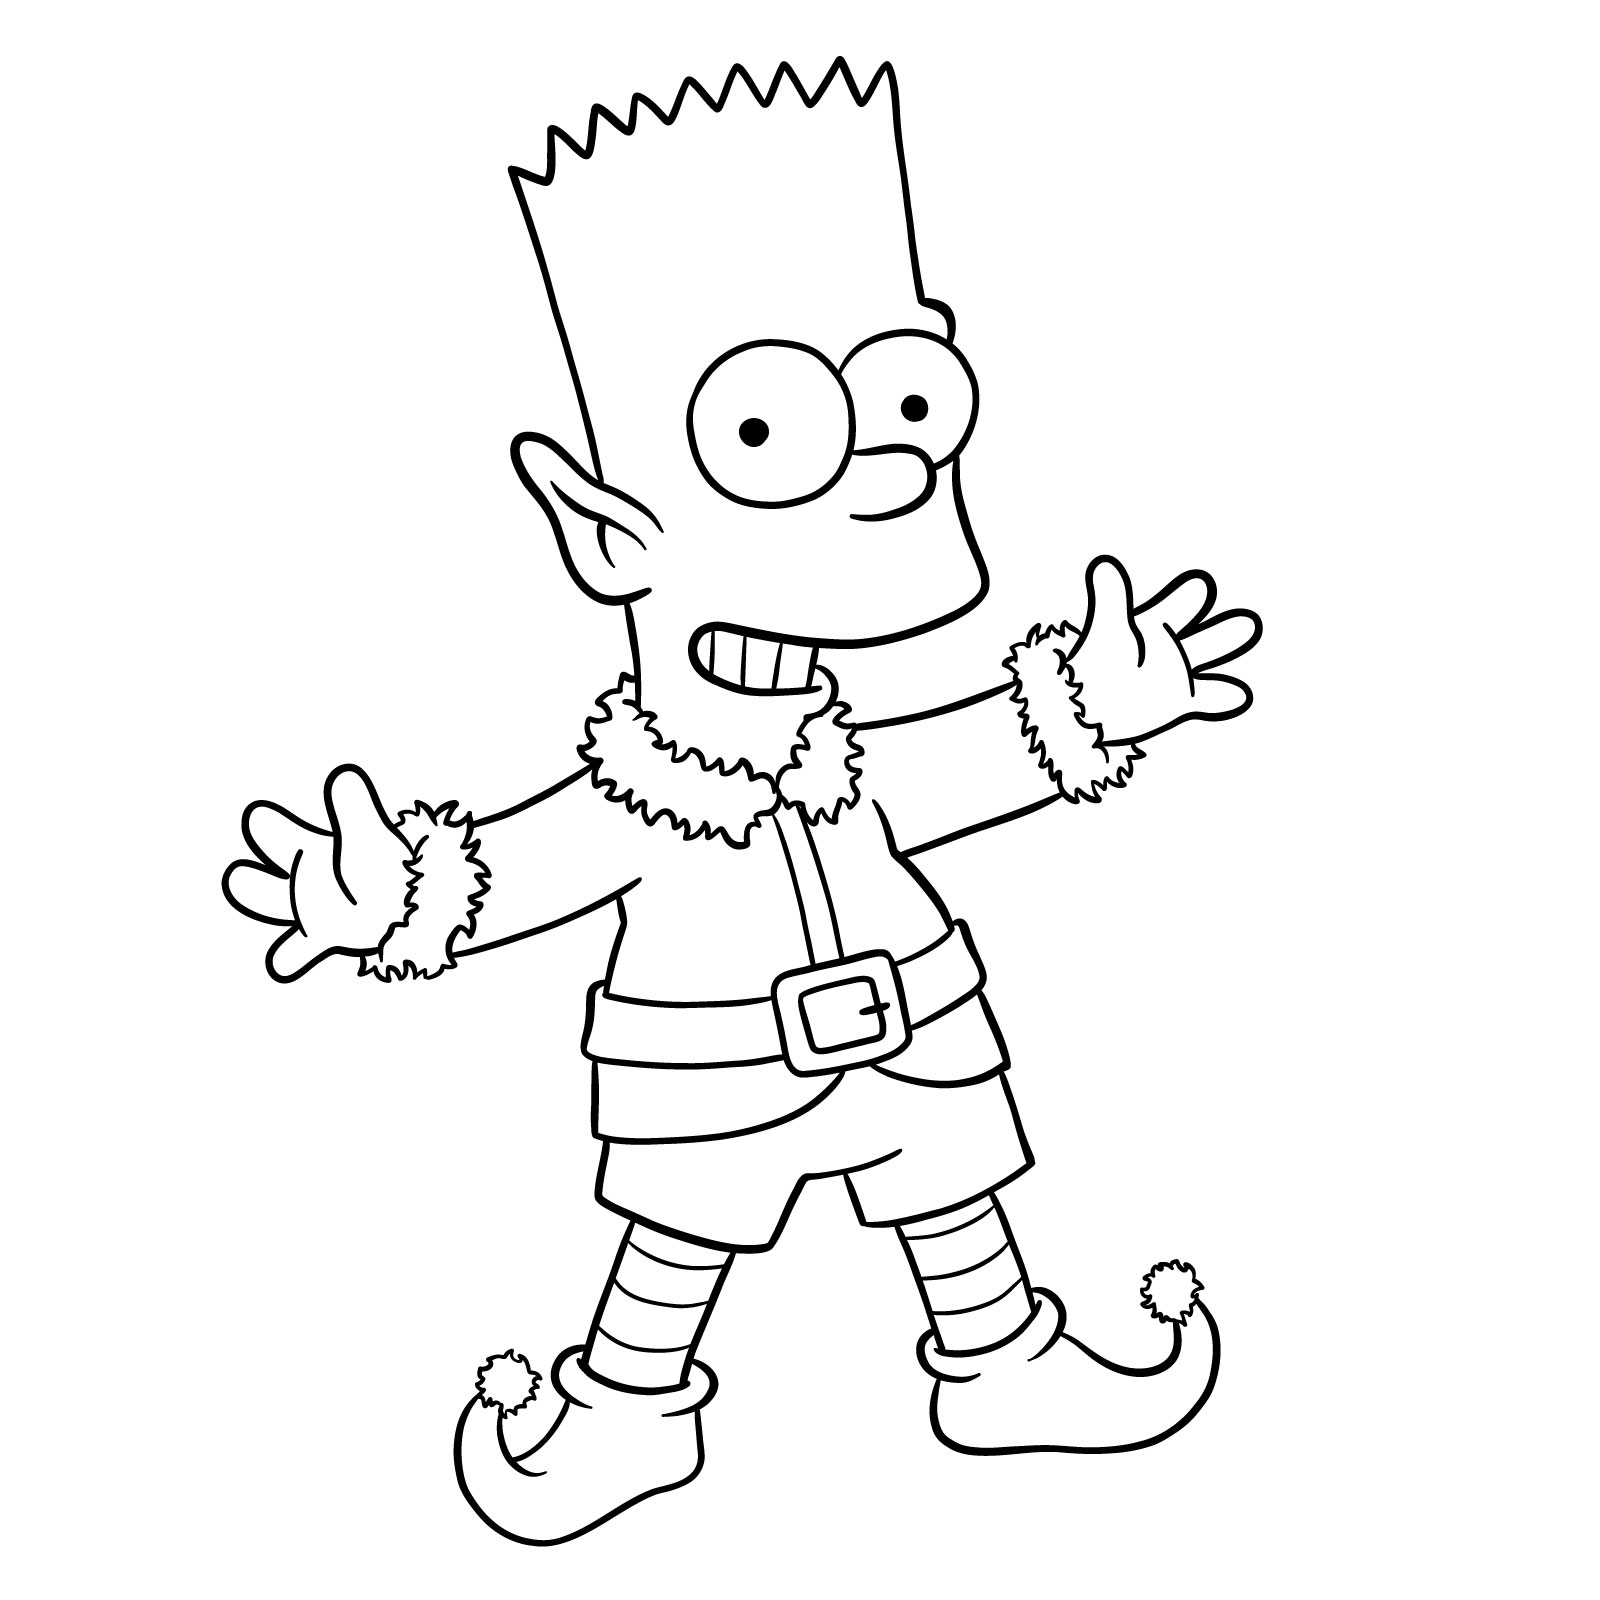 How to draw Bart Simpson as a Christmas Elf - step 30